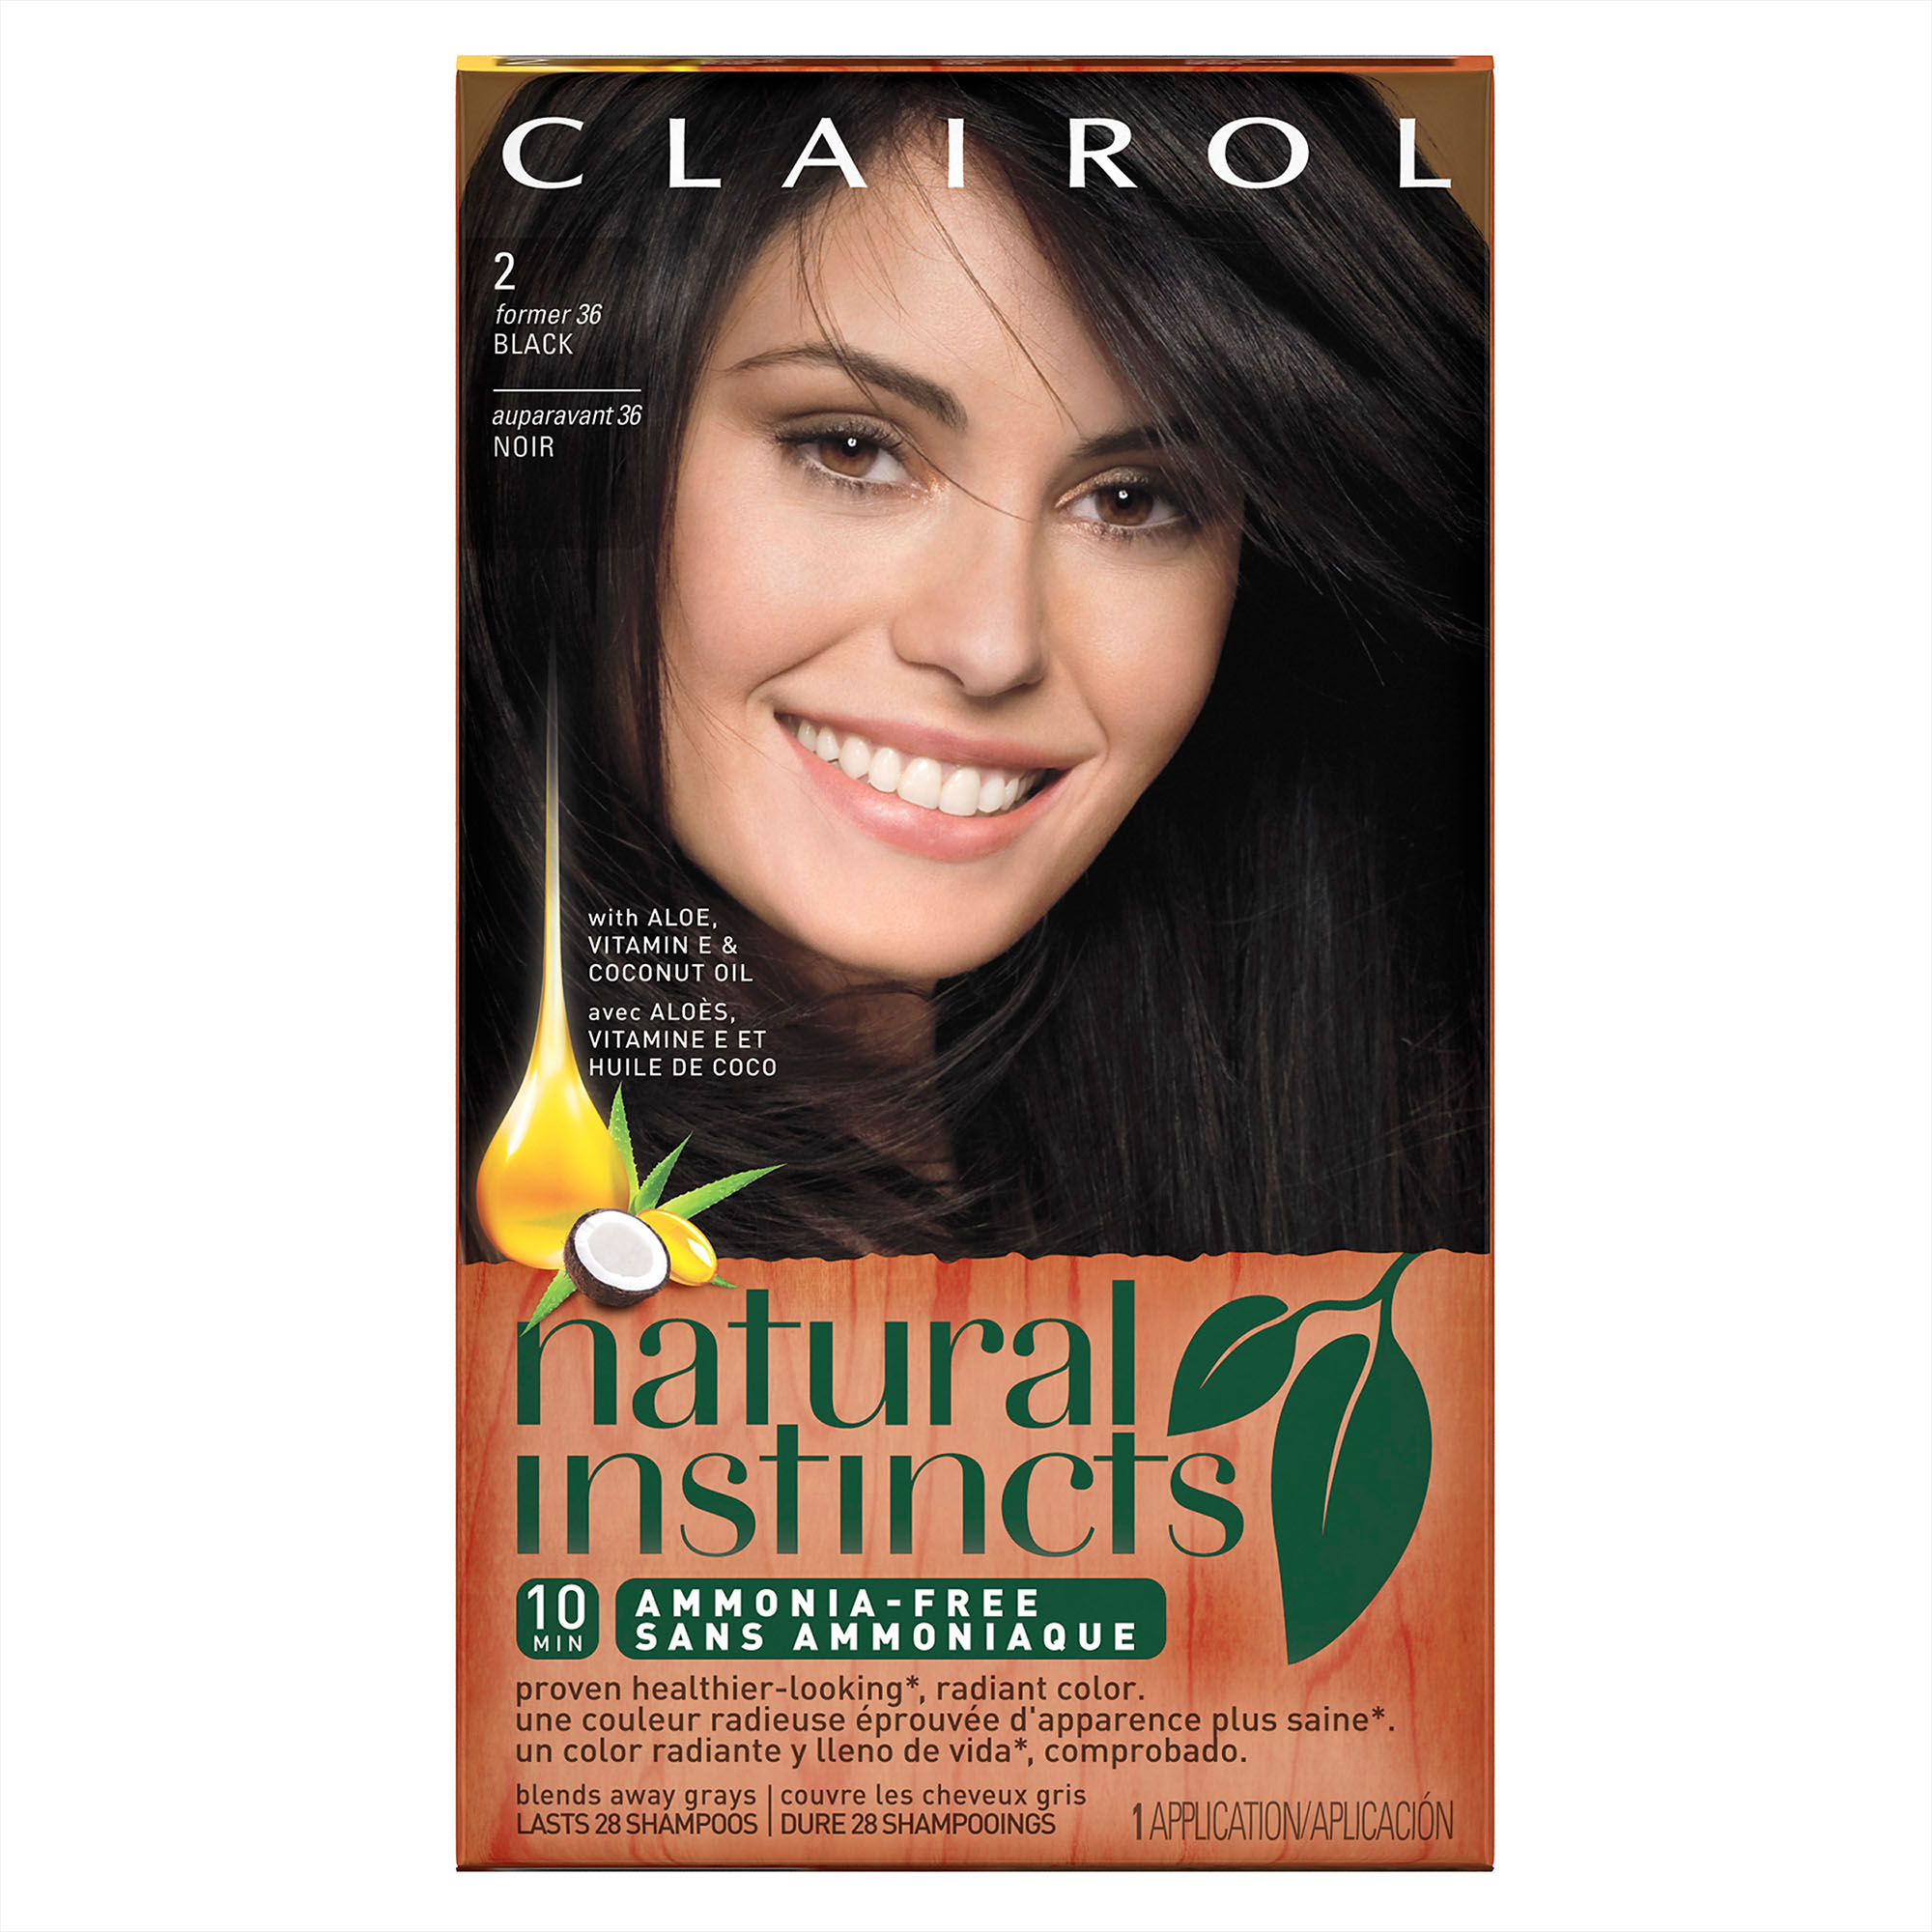 Clairol Natural Instincts Semi-Permanent Hair Color, Black Midnight, 2/36 - image 1 of 6